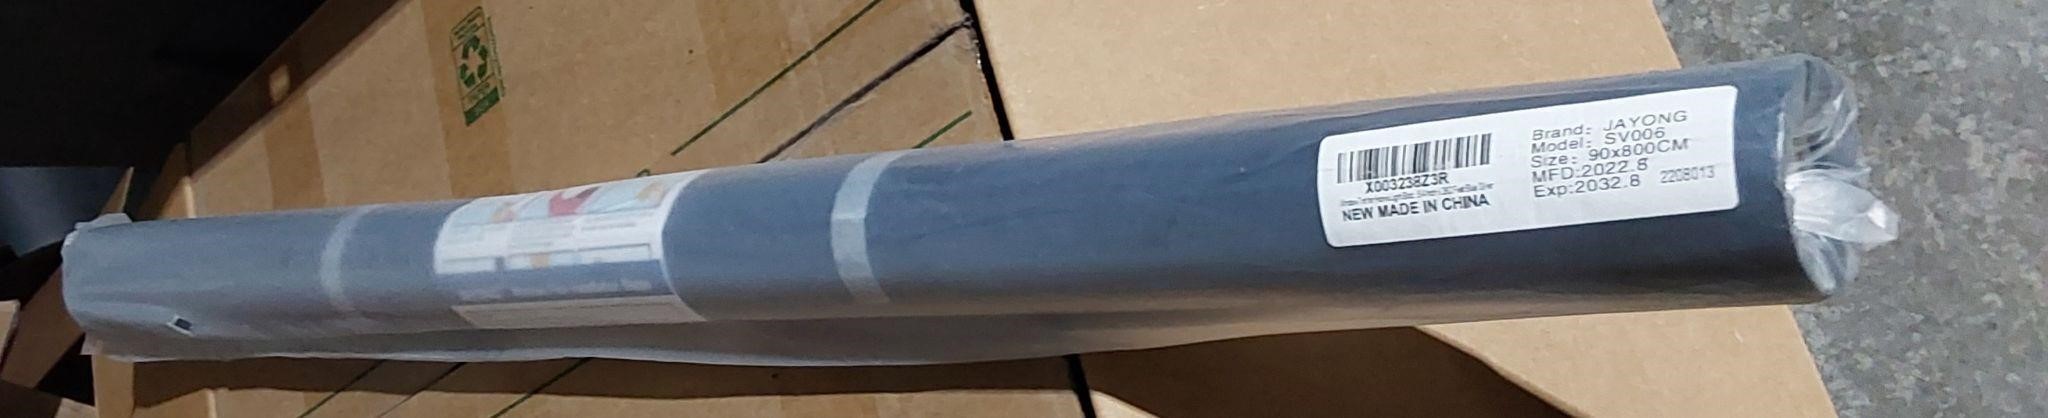 35"×26' Home Window Tint Blue Silver